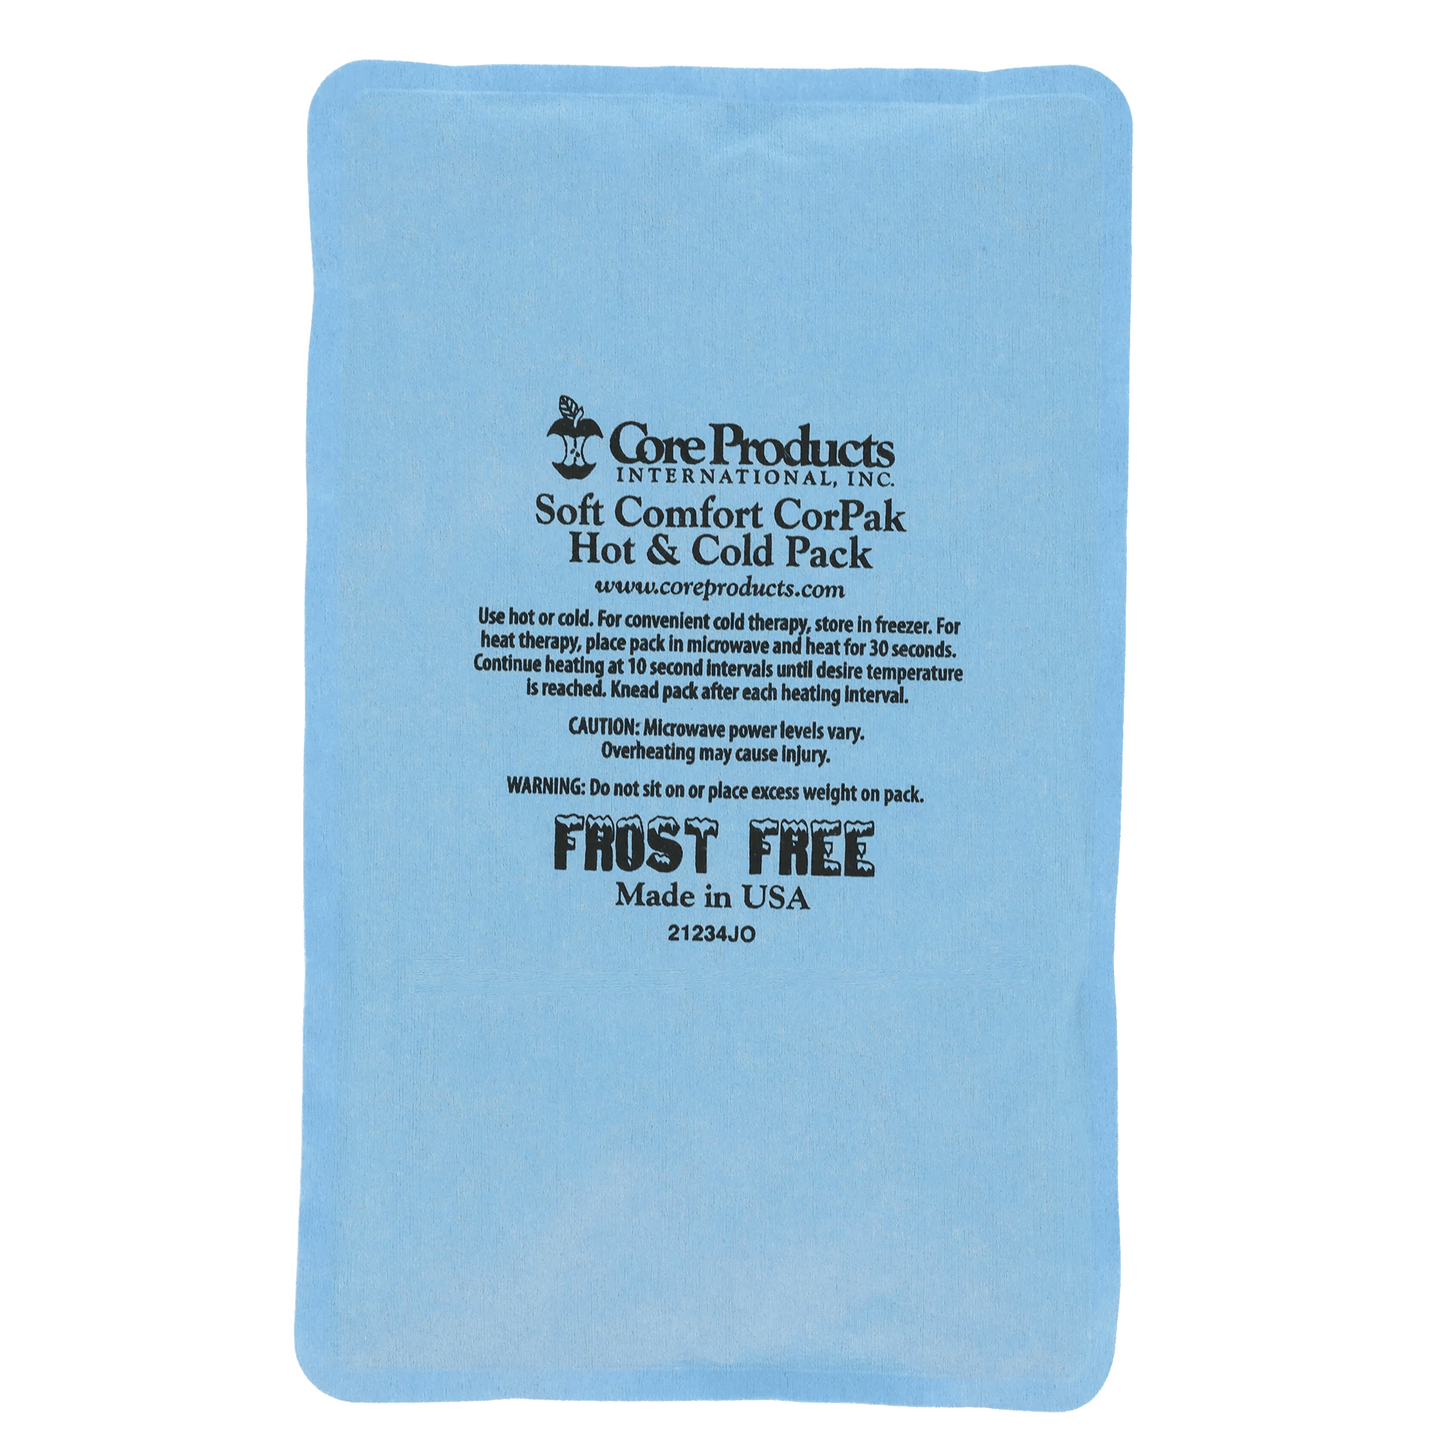 Primary Image of Soft Comfort Hot Cold Pack